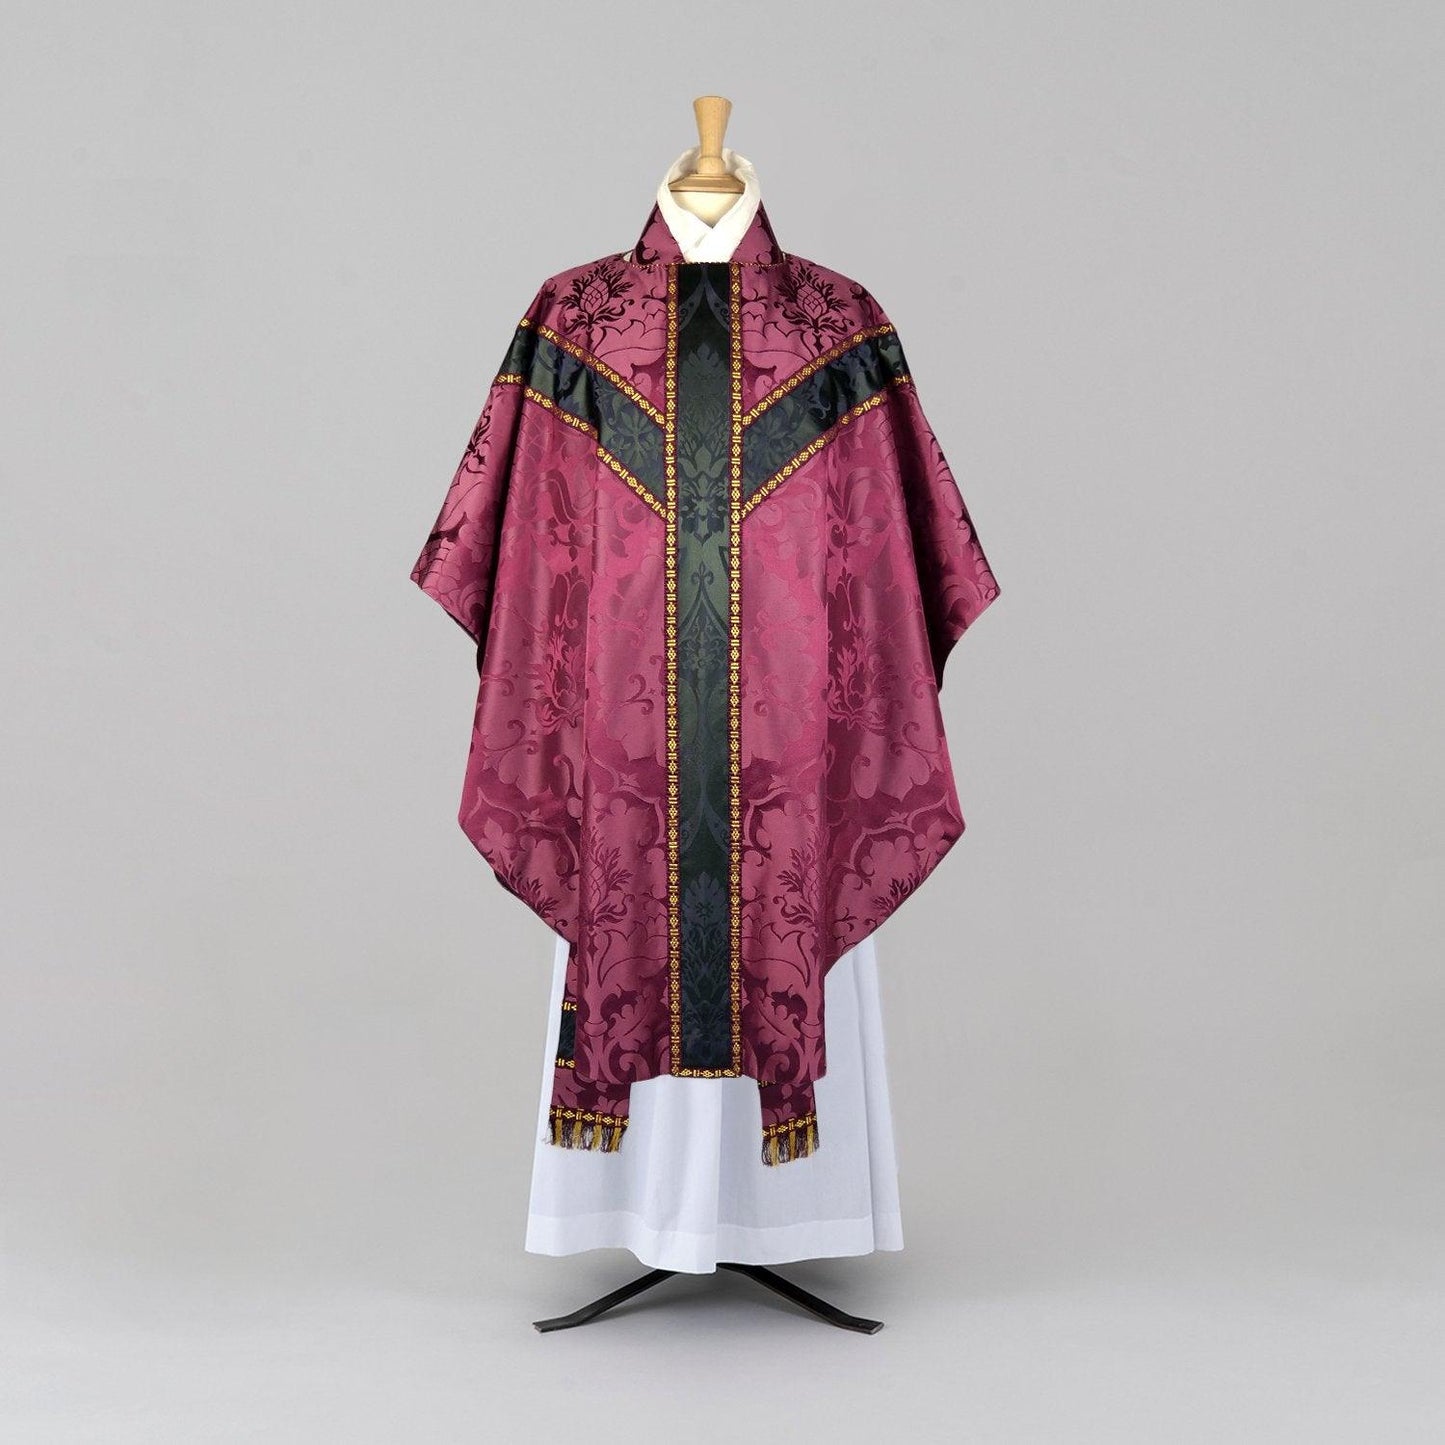 Semi-Gothic Chasuble in Comper Purple 'Bellini' with Sarum Indigo 'Gothic' Orphreys and Peacock Embroidery - Watts & Co.